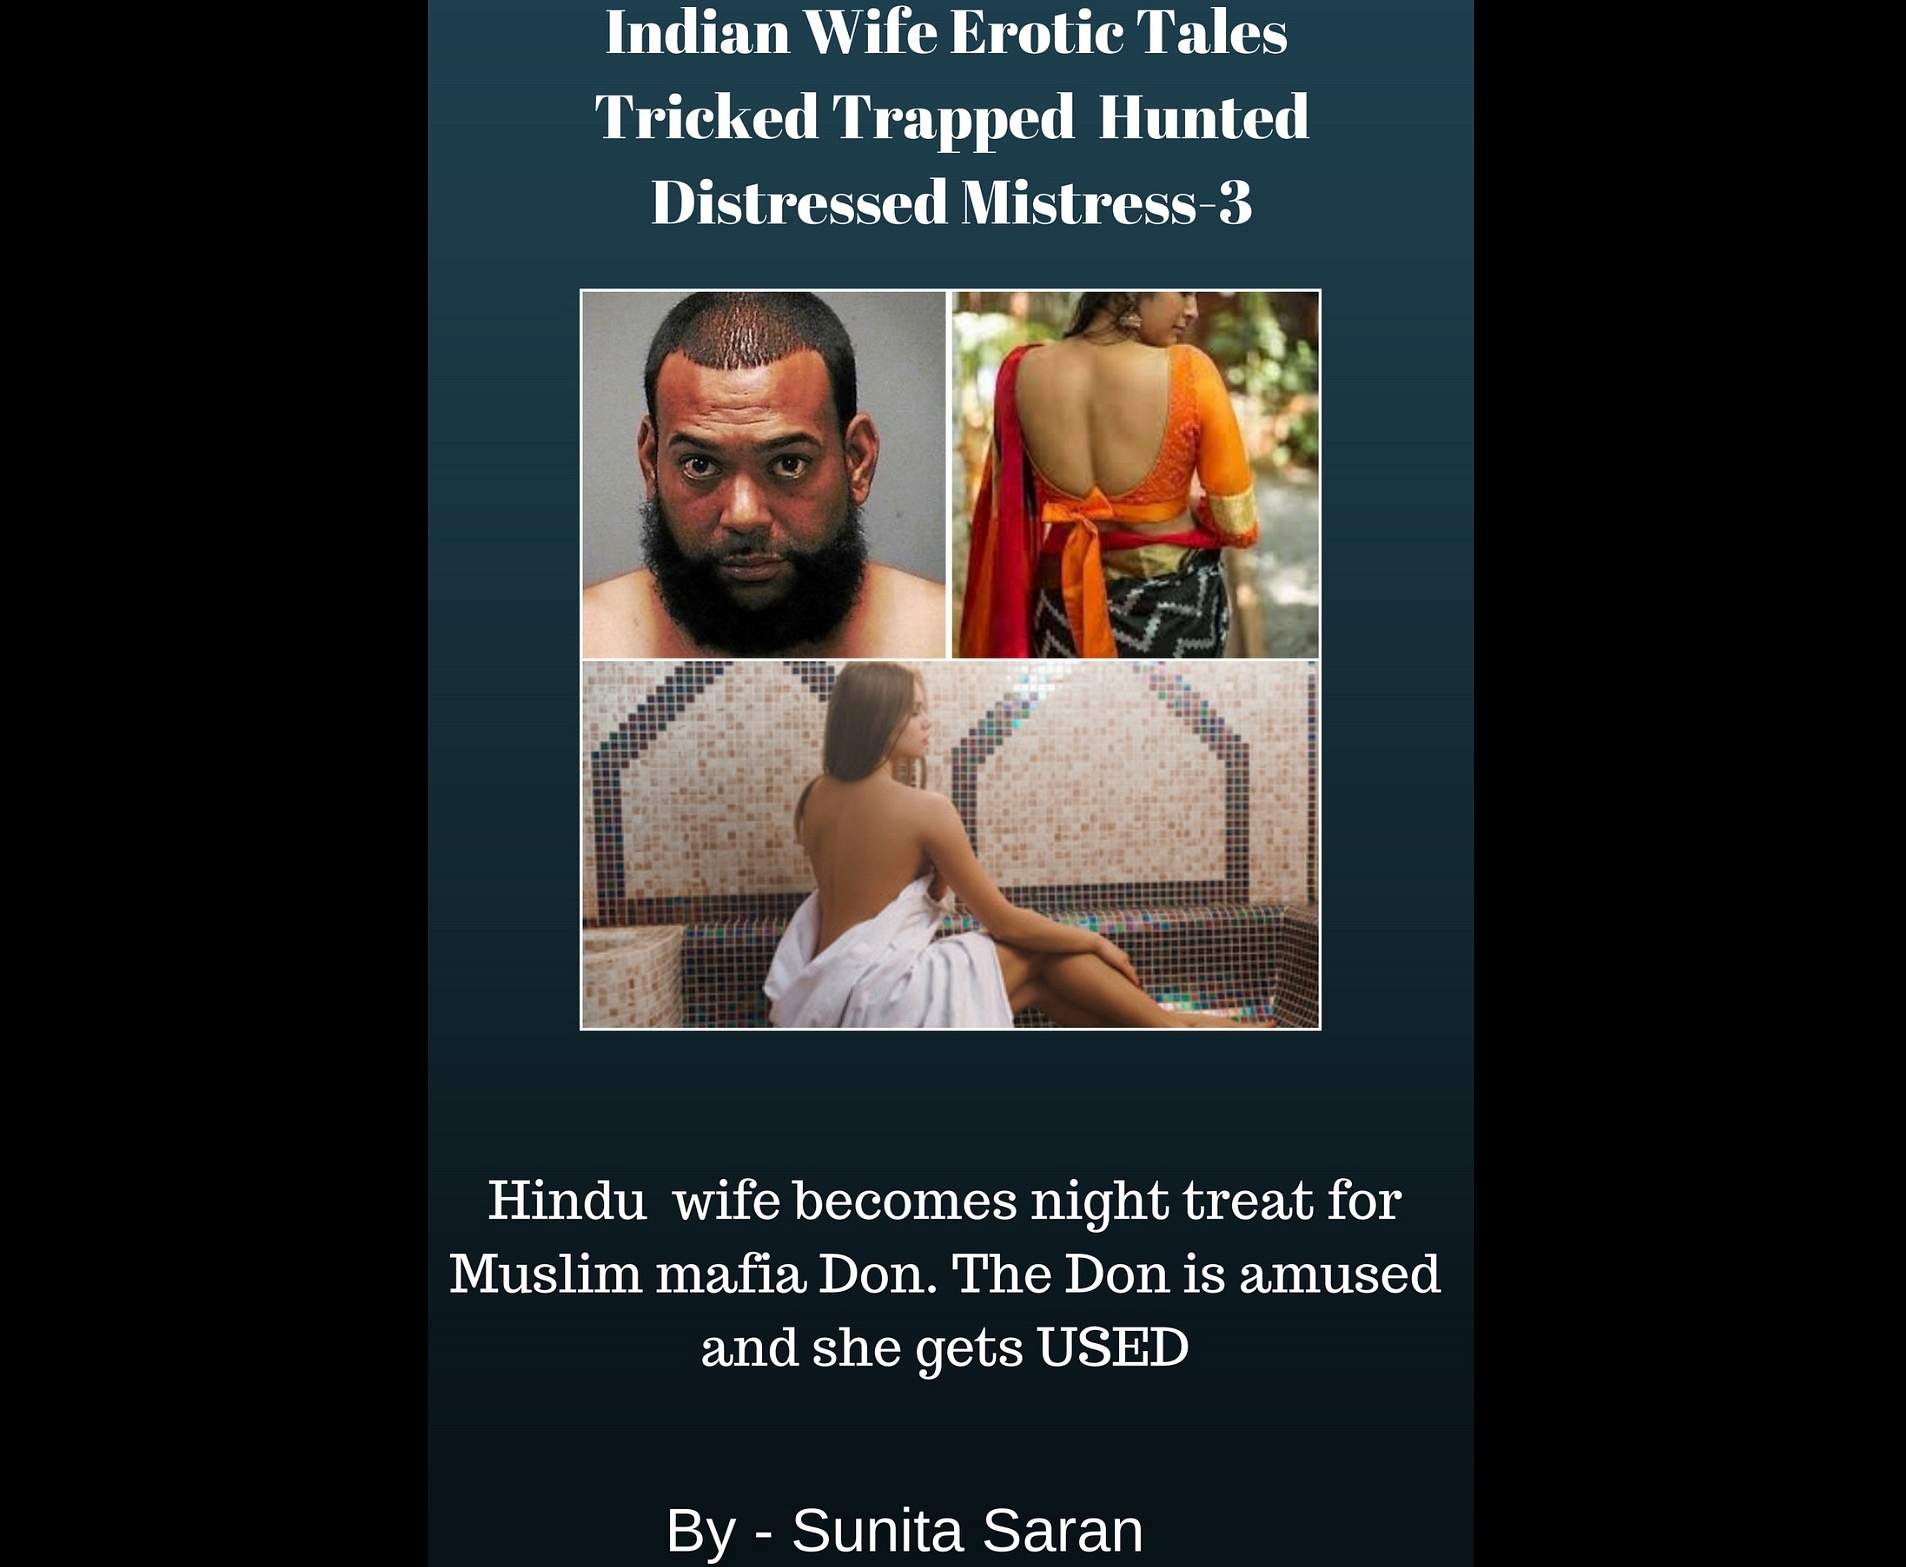 On Kindle Store, A Sea Of Pornographic And Rape Fantasy Books Featuring Hindu Women And Muslim